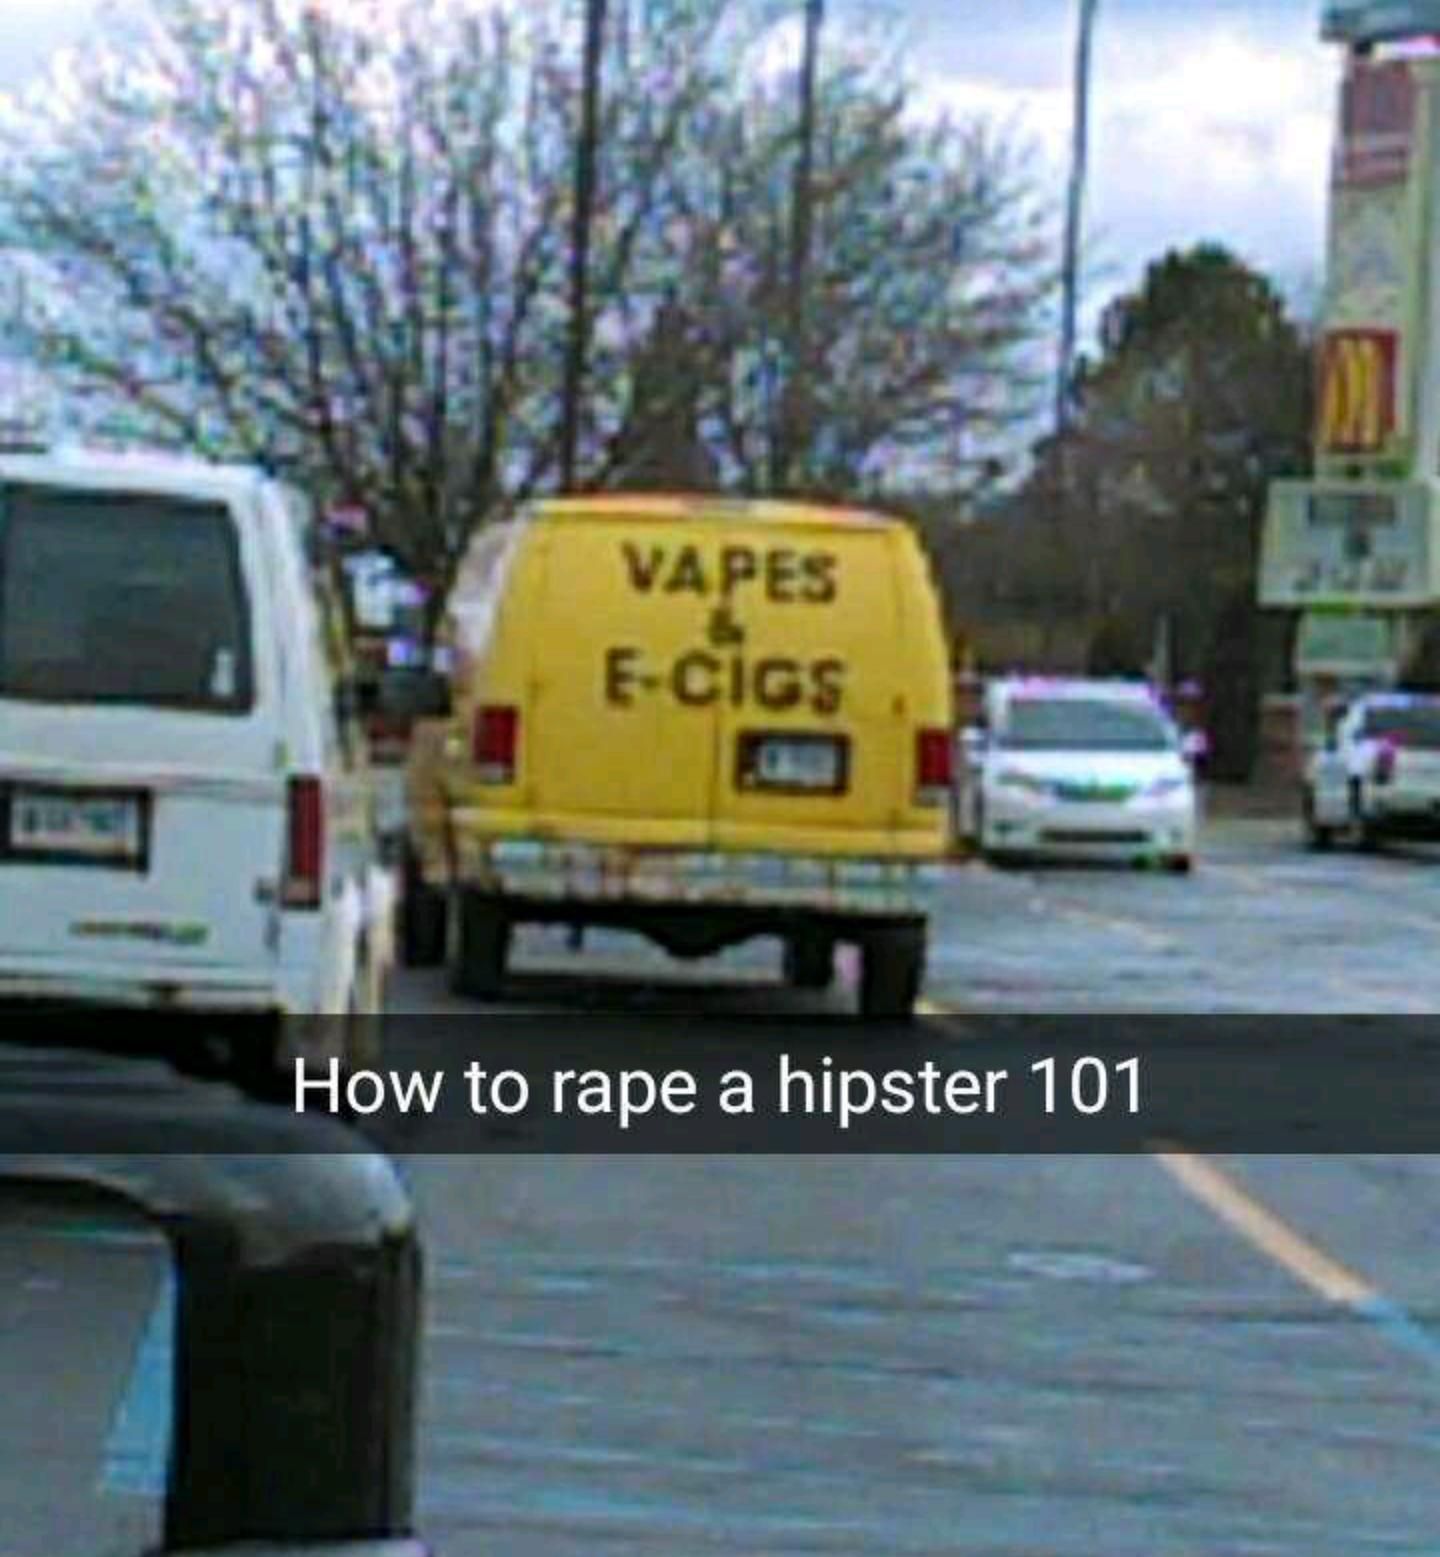 Get in the van, I have candy-flavored vape juice